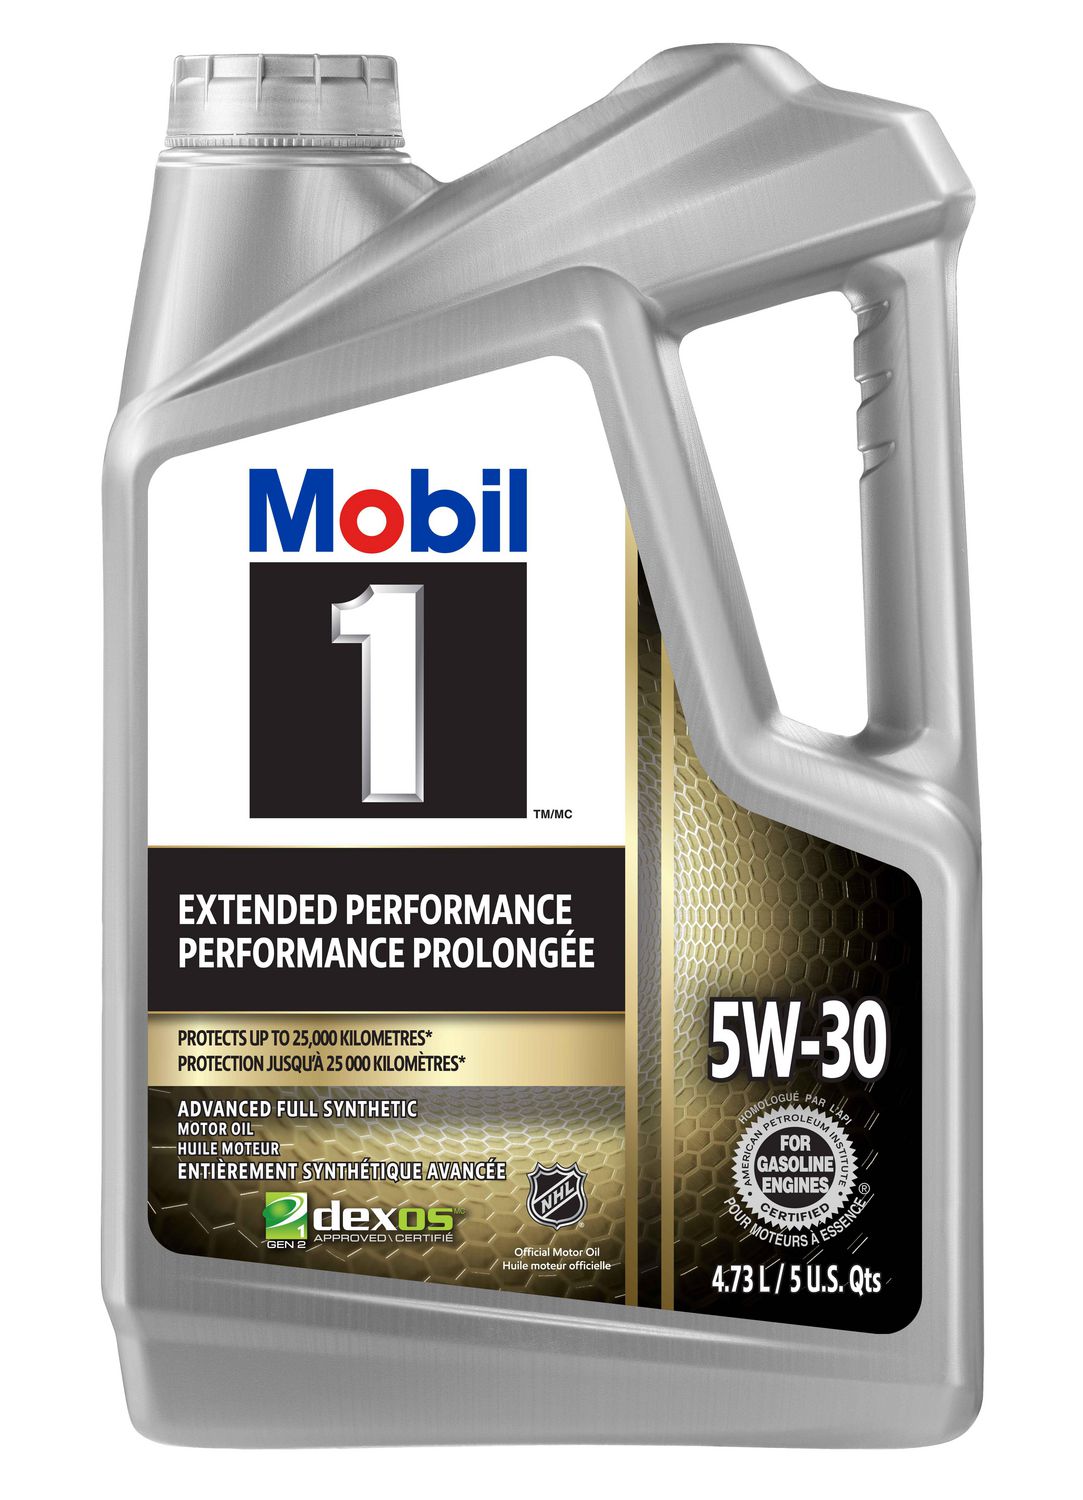 mobil-1-extended-performance-full-synthetic-engine-oil-5w-30-4-73-l